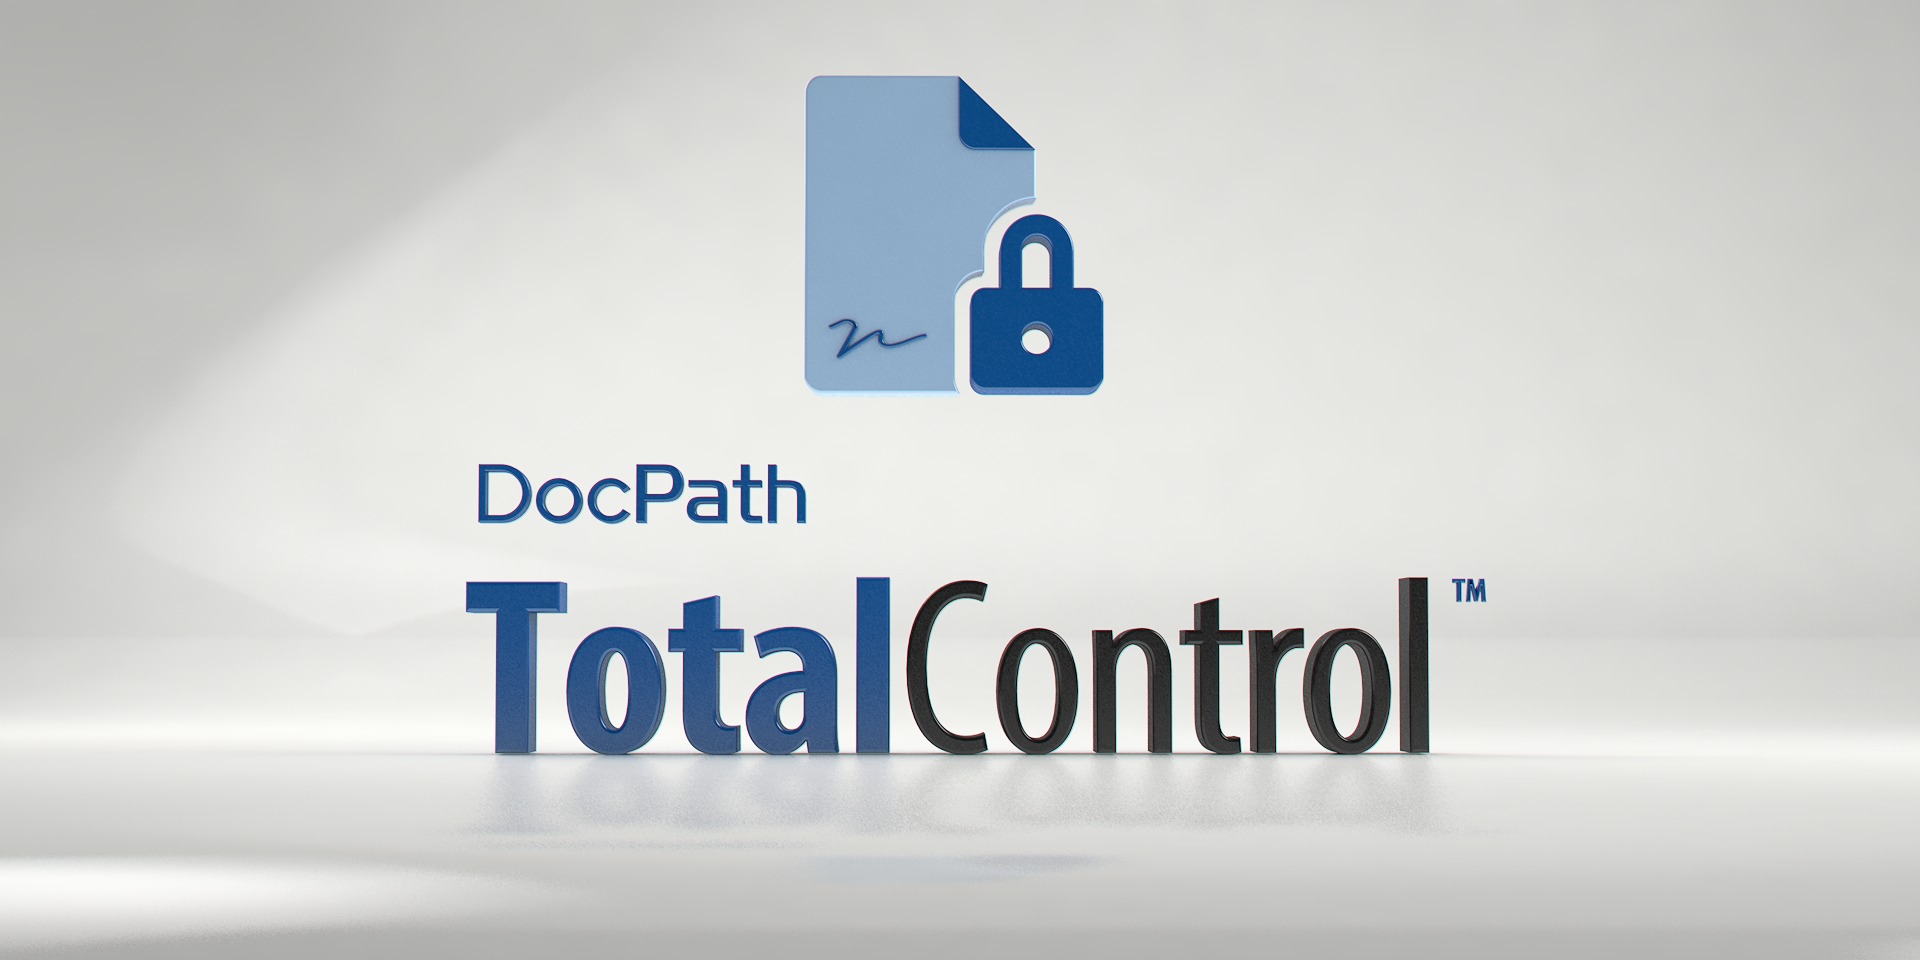 DocPath TotalControl provides insurance companies a documental software solution for the easy and intuitive creation of dynamic forms and the total control of documents from design to distribution.